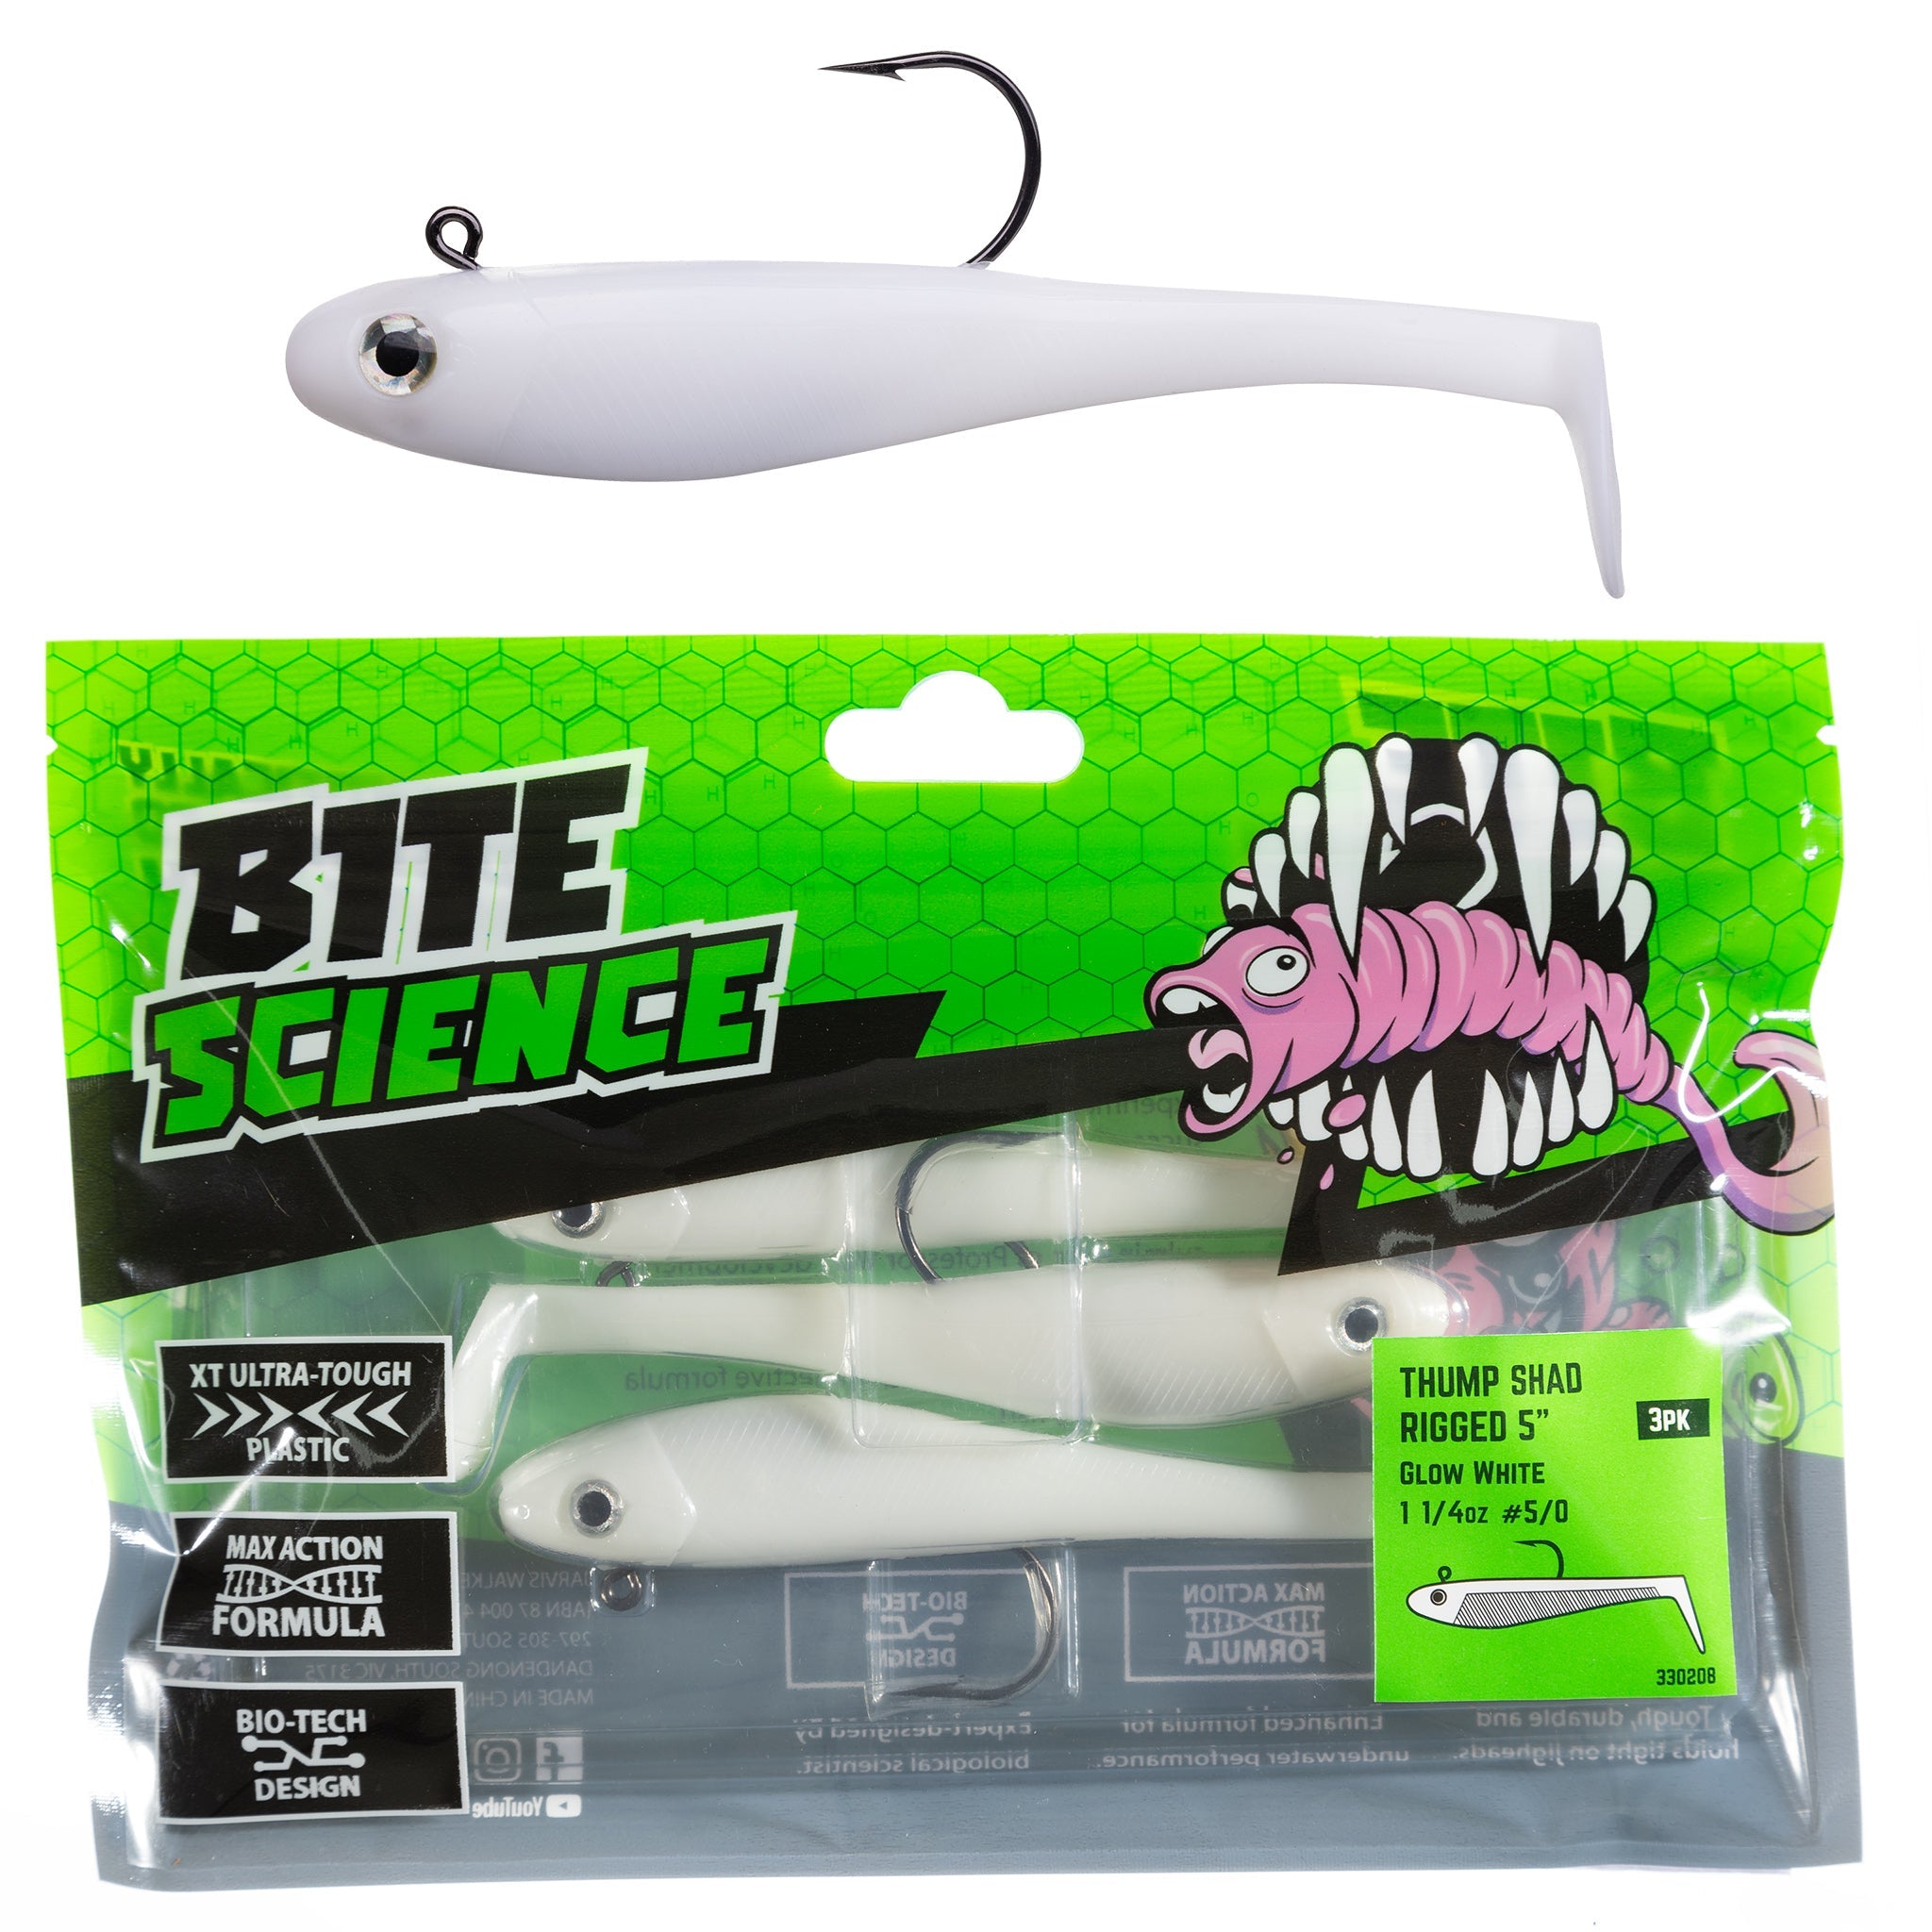 Bite Science Thump Shad Rigged Soft Plastic Lures – Jarvis Walker Brands